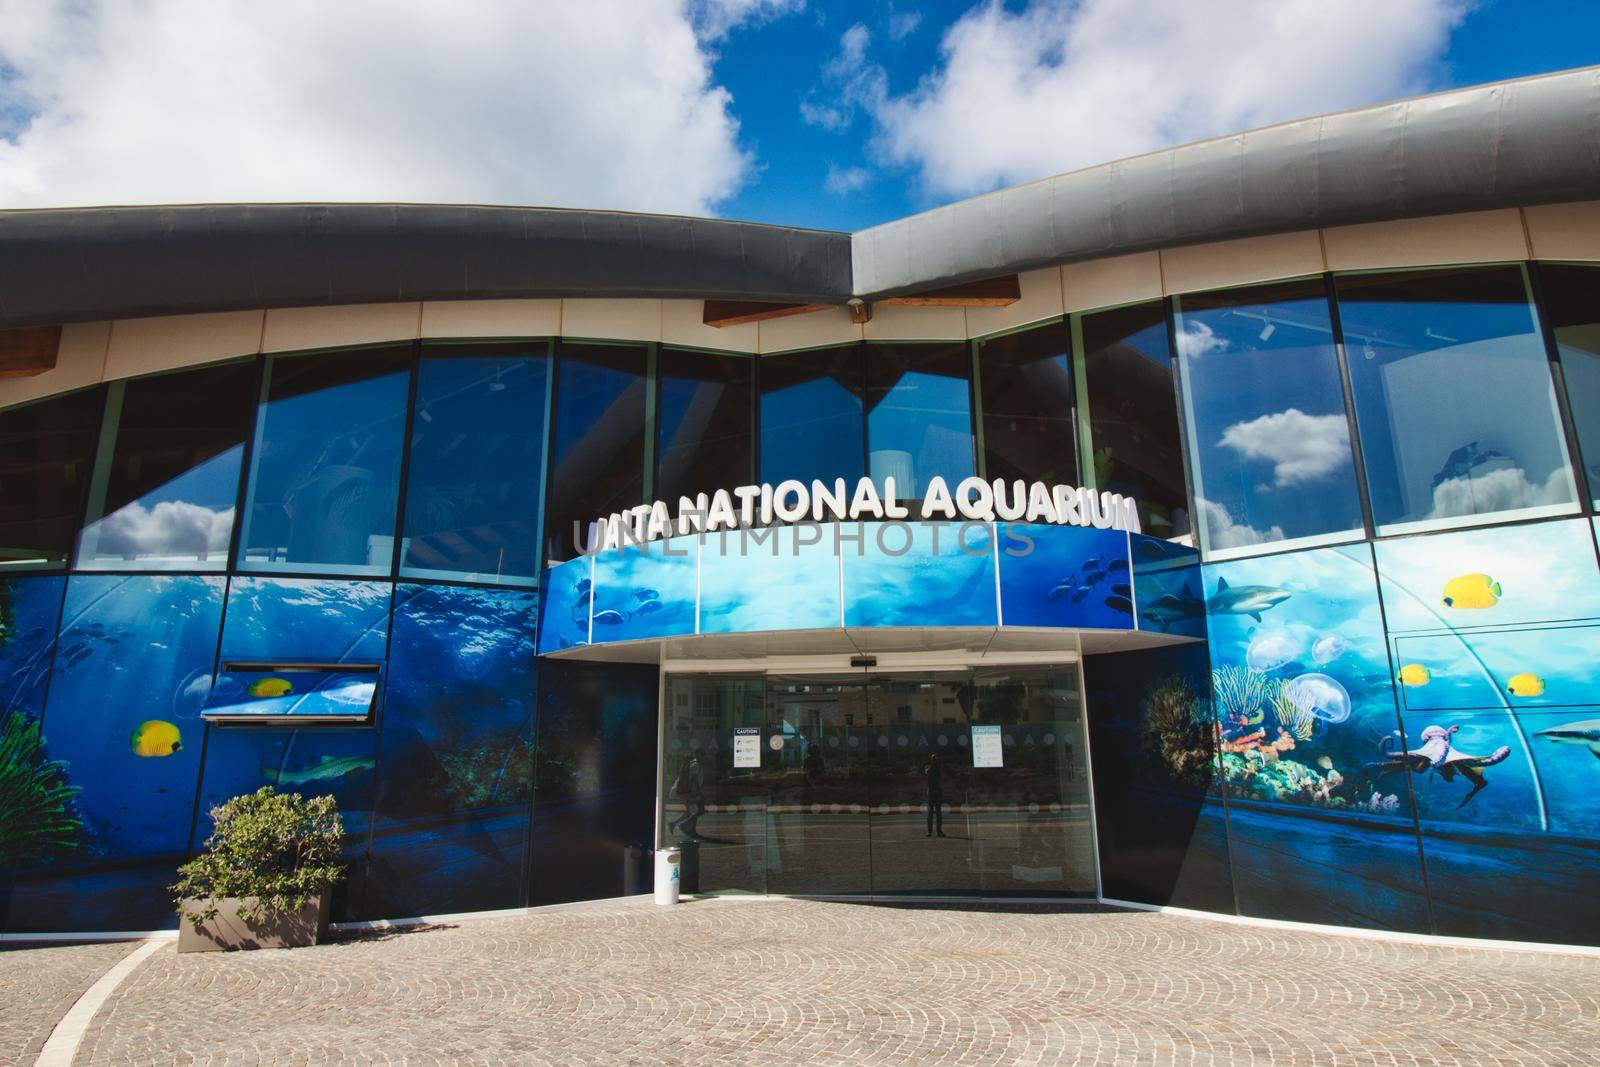 Main entrance to the Malta National Aquarium by tennesseewitney